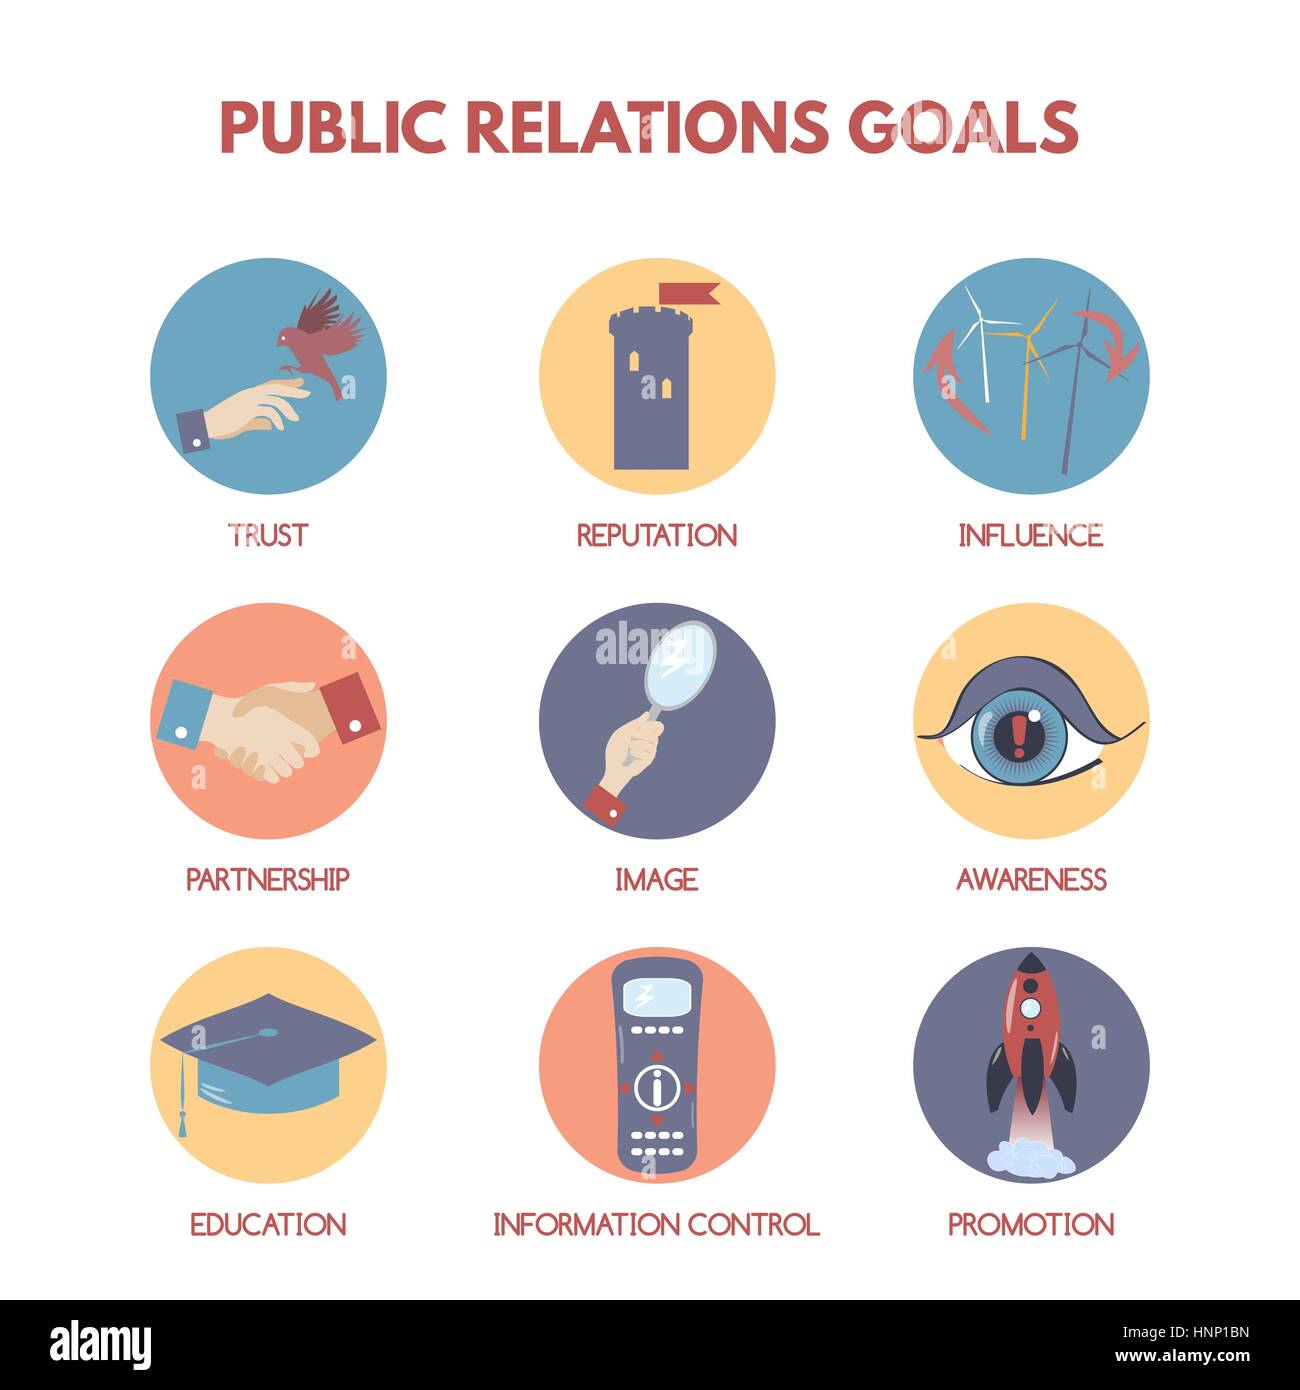 Infographic on public relations goals and objectives. Stock Vector